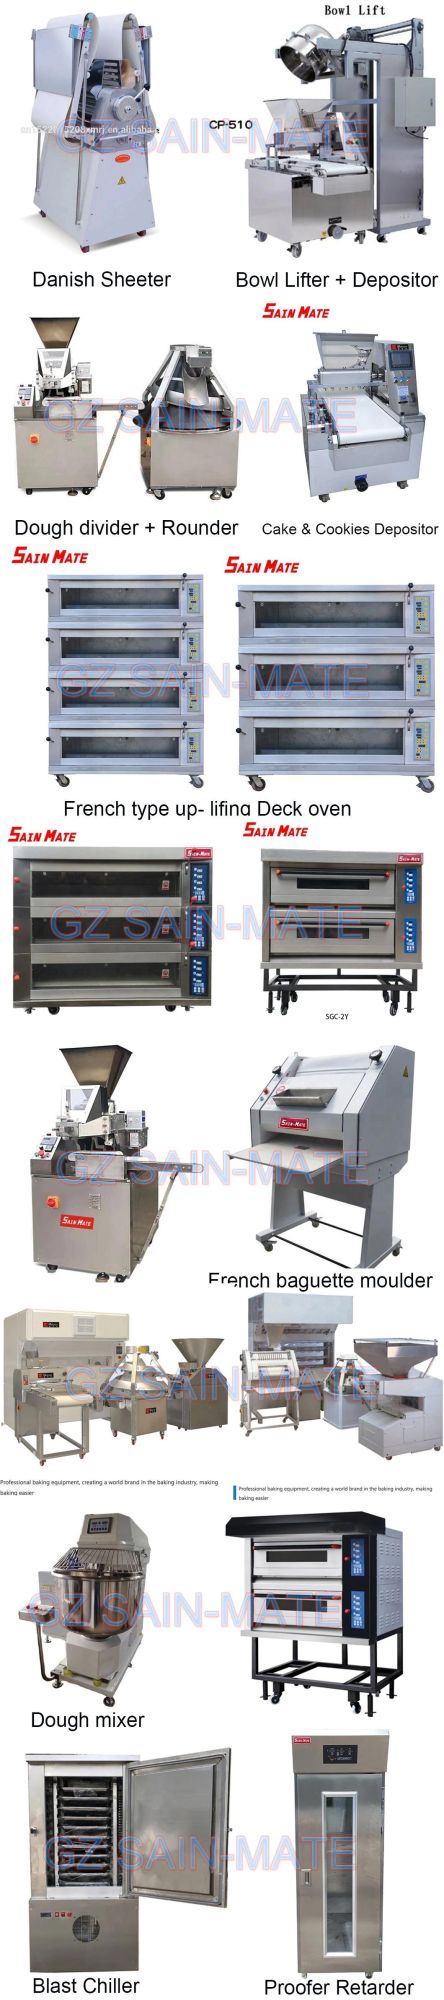 Kitchen Catering Bakery Equipment 16 Trays Diesel Commercial Bread Rotary Rotating Rack Oven